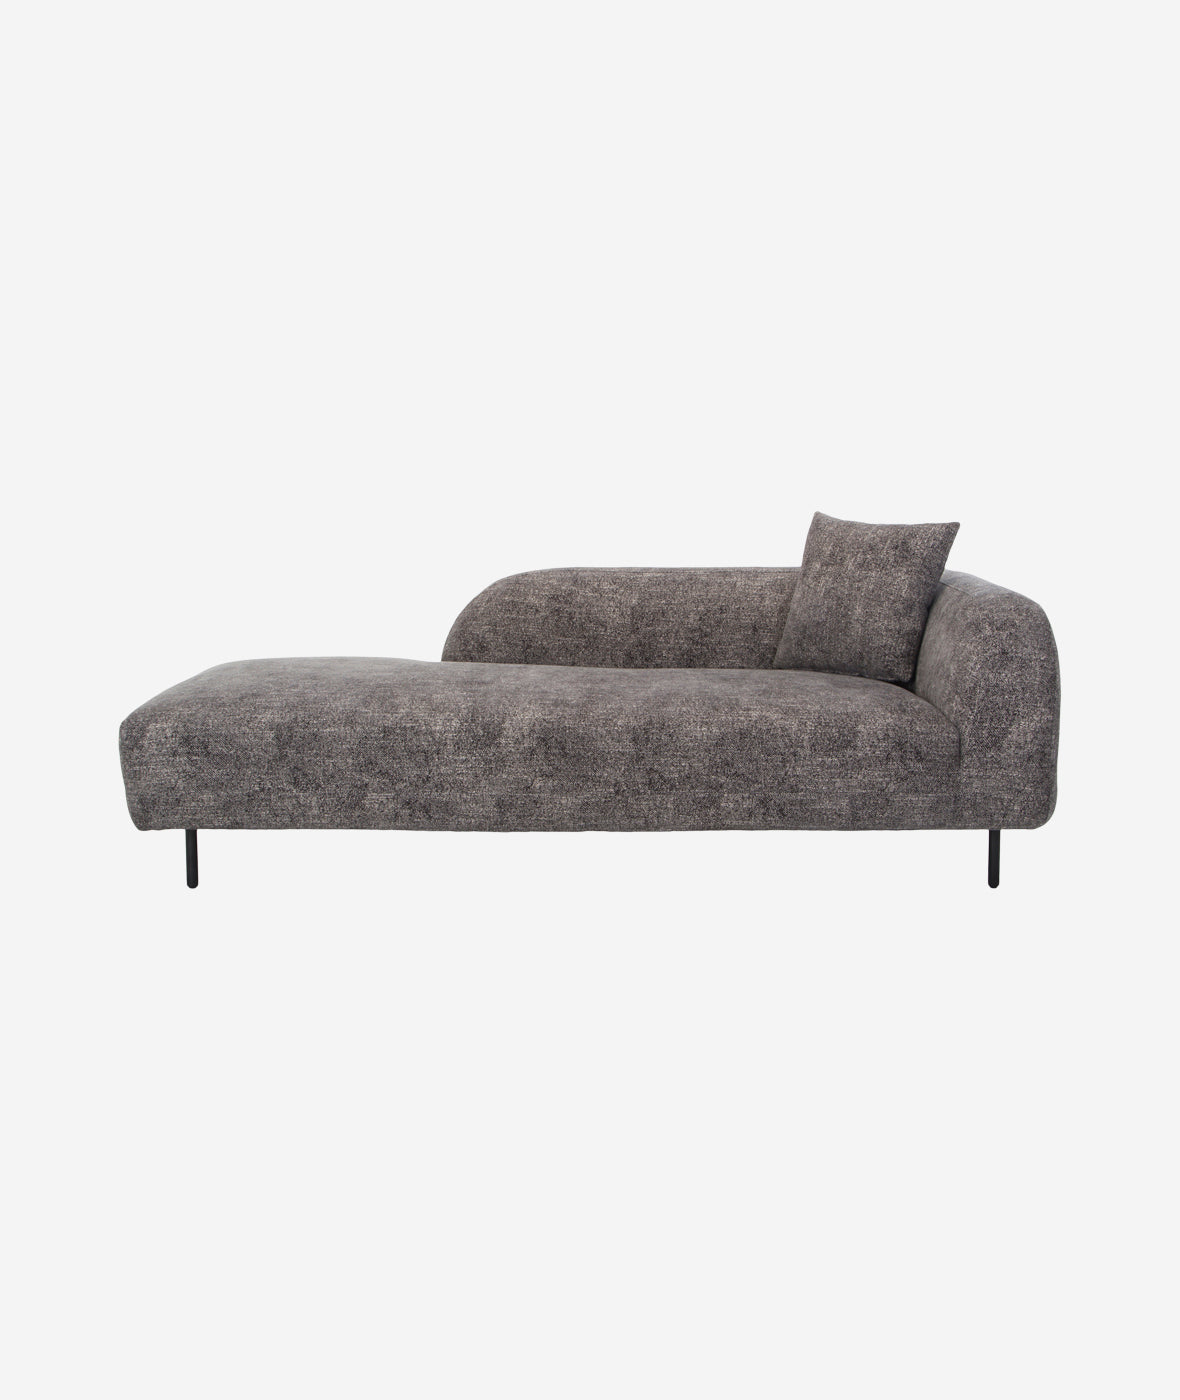 Deleuze Chaise - More Options